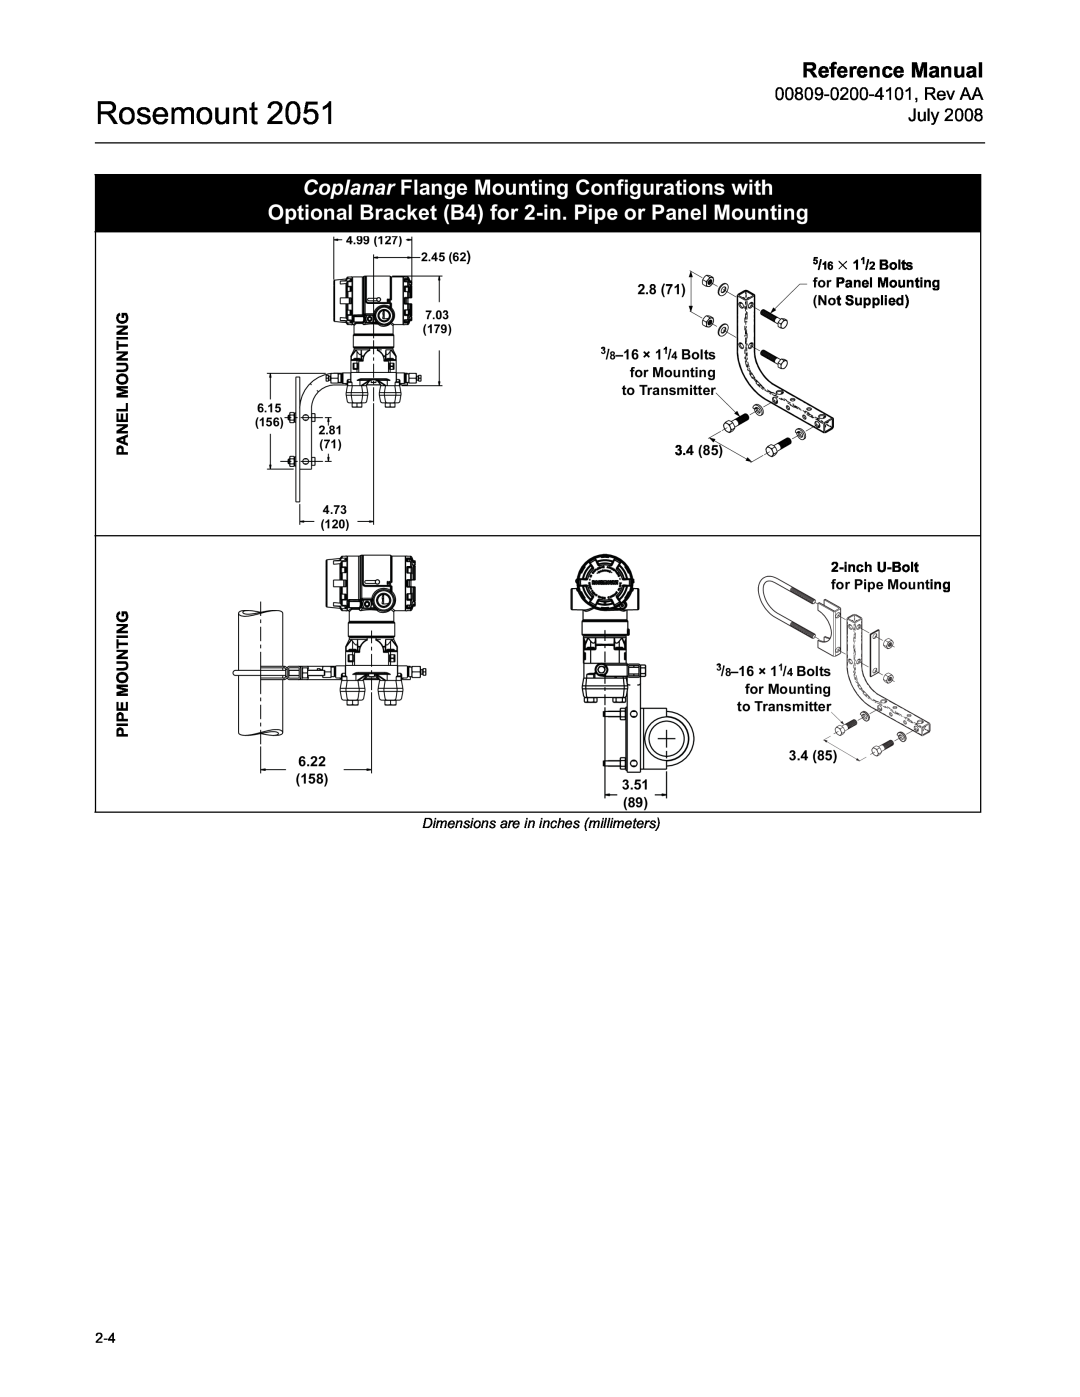 Emerson Process Management 2051 manual Coplanar Flange Mounting Configurations with, Rosemount, Reference Manual, July 